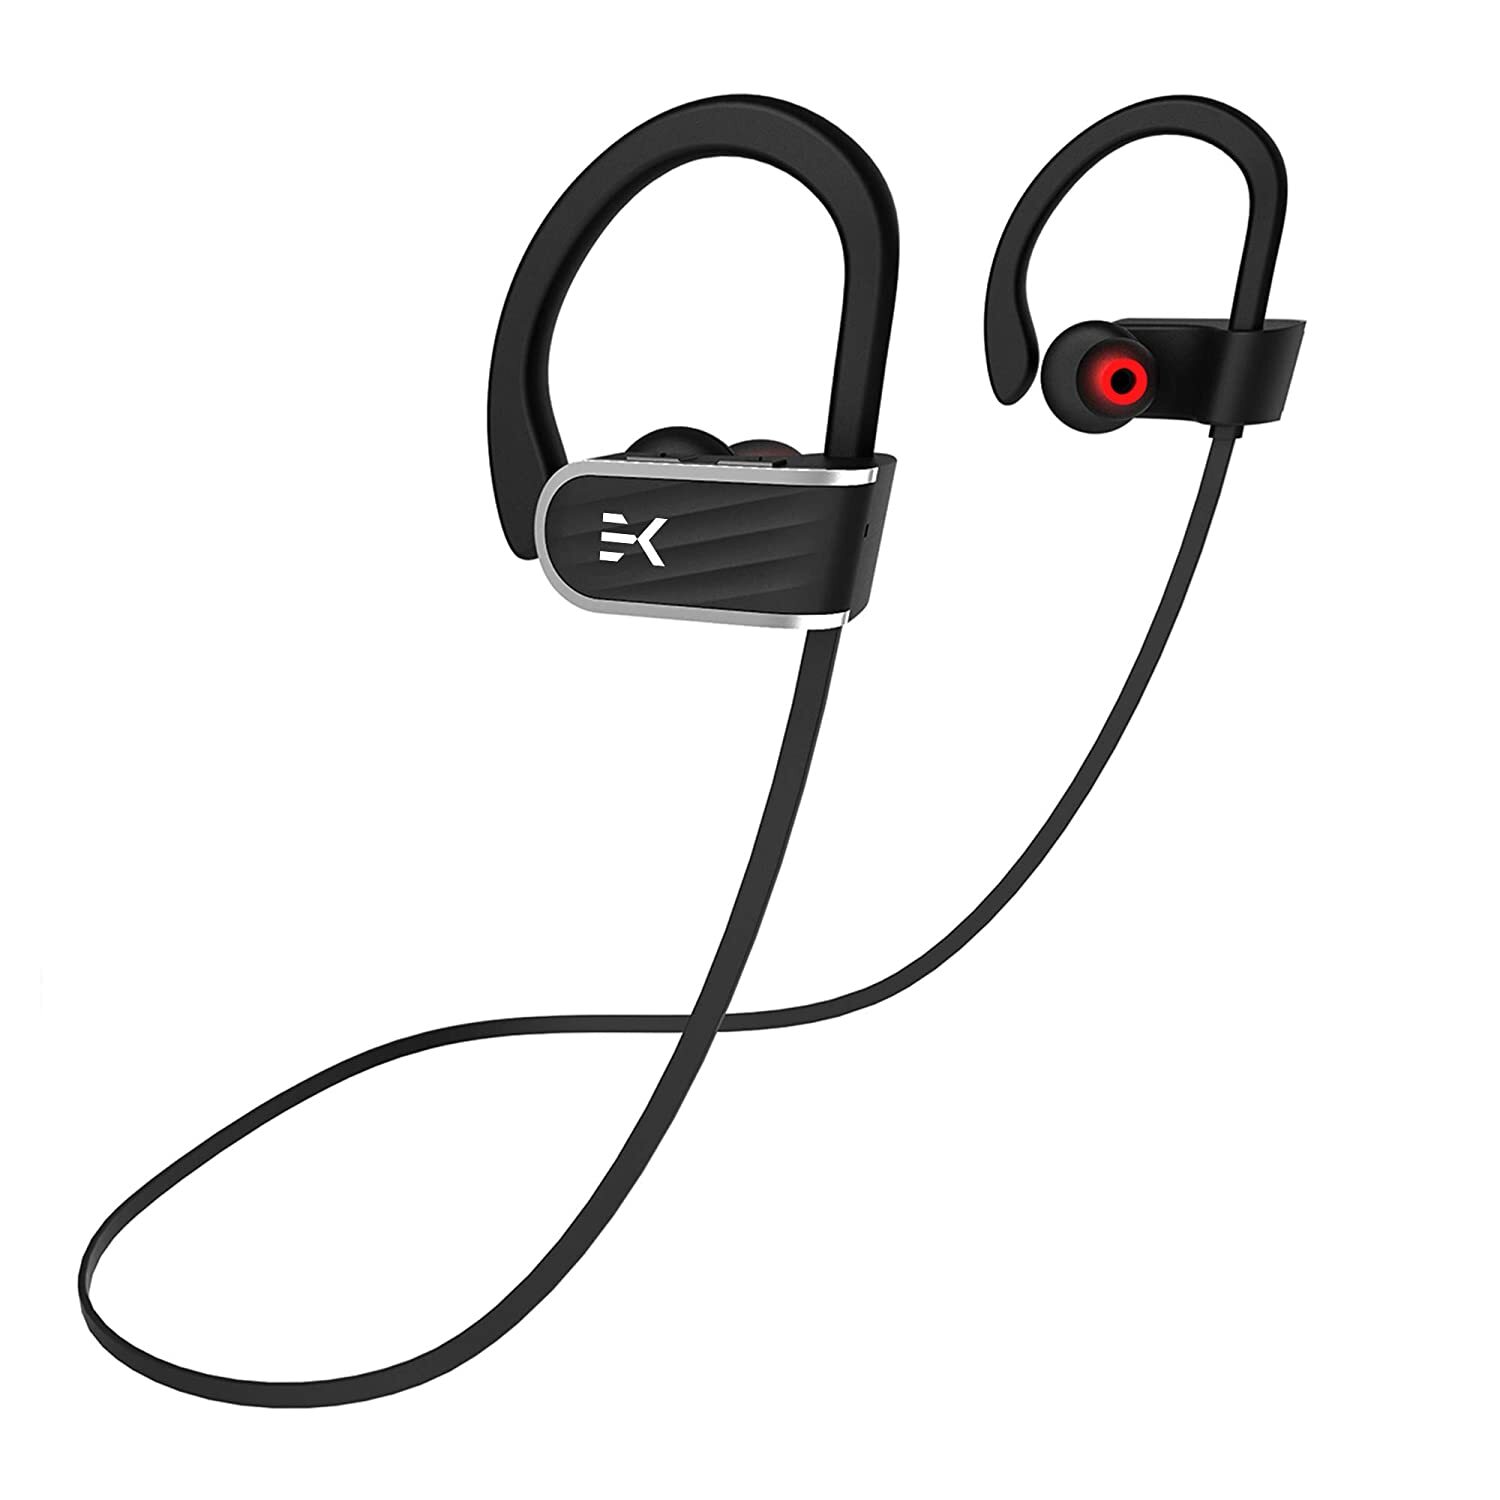 Klef X2 Wireless Bluetooth Headphones/Headset/Earphones with HD Quality Sound, Long Battery Life, Handsfree Mic and Free Travel Pouch/Carry Case (Black) | Waterproof Headphone - Rated IPX 7-M000000000387 www.mysocially.com